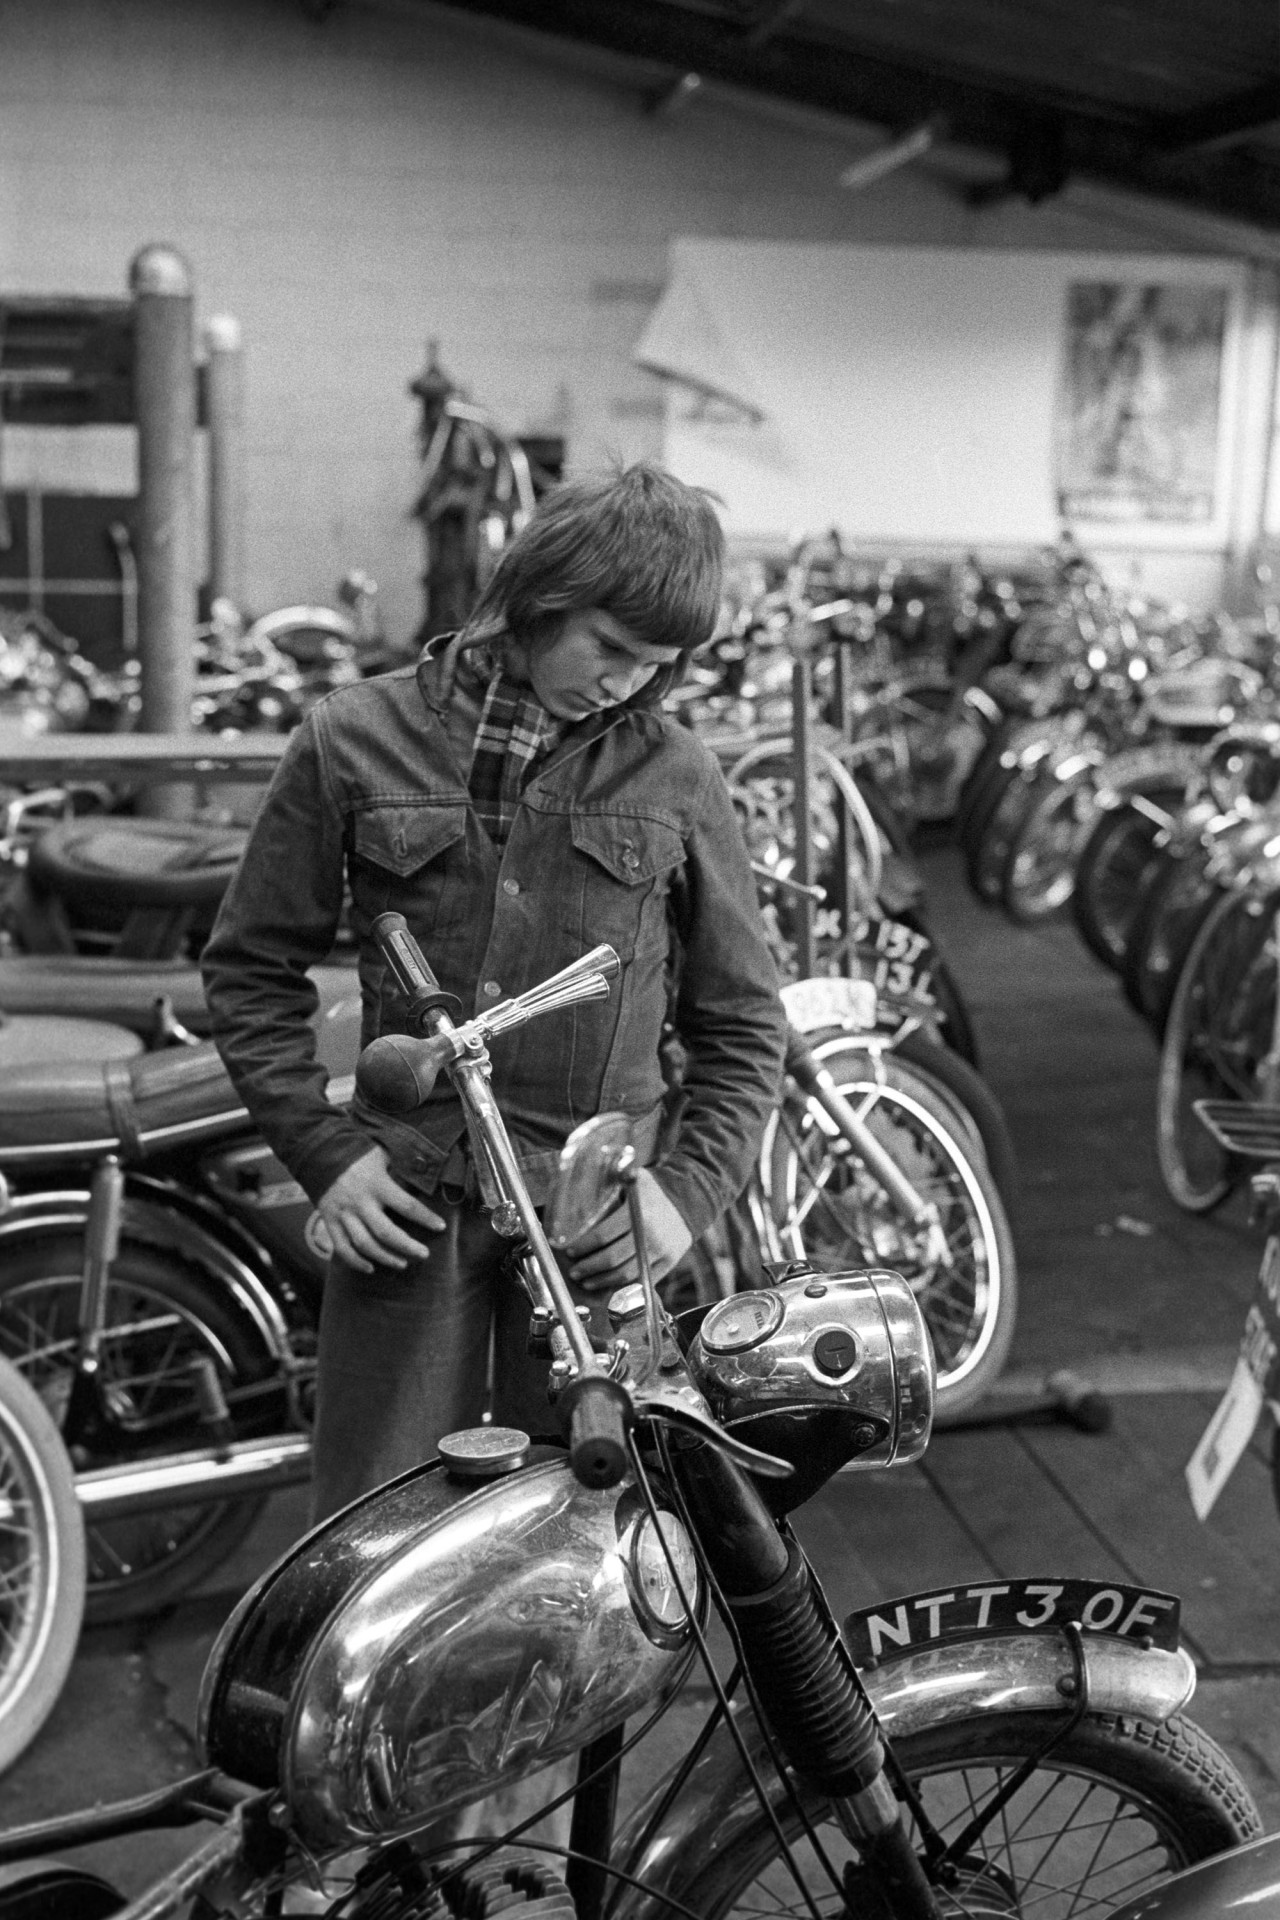 Young man looking at motor bikes in showroom.
[A young man in a denim jacket, looking at a BSA motorbike in Les Smale's showroom in Calf Street in Torrington.]